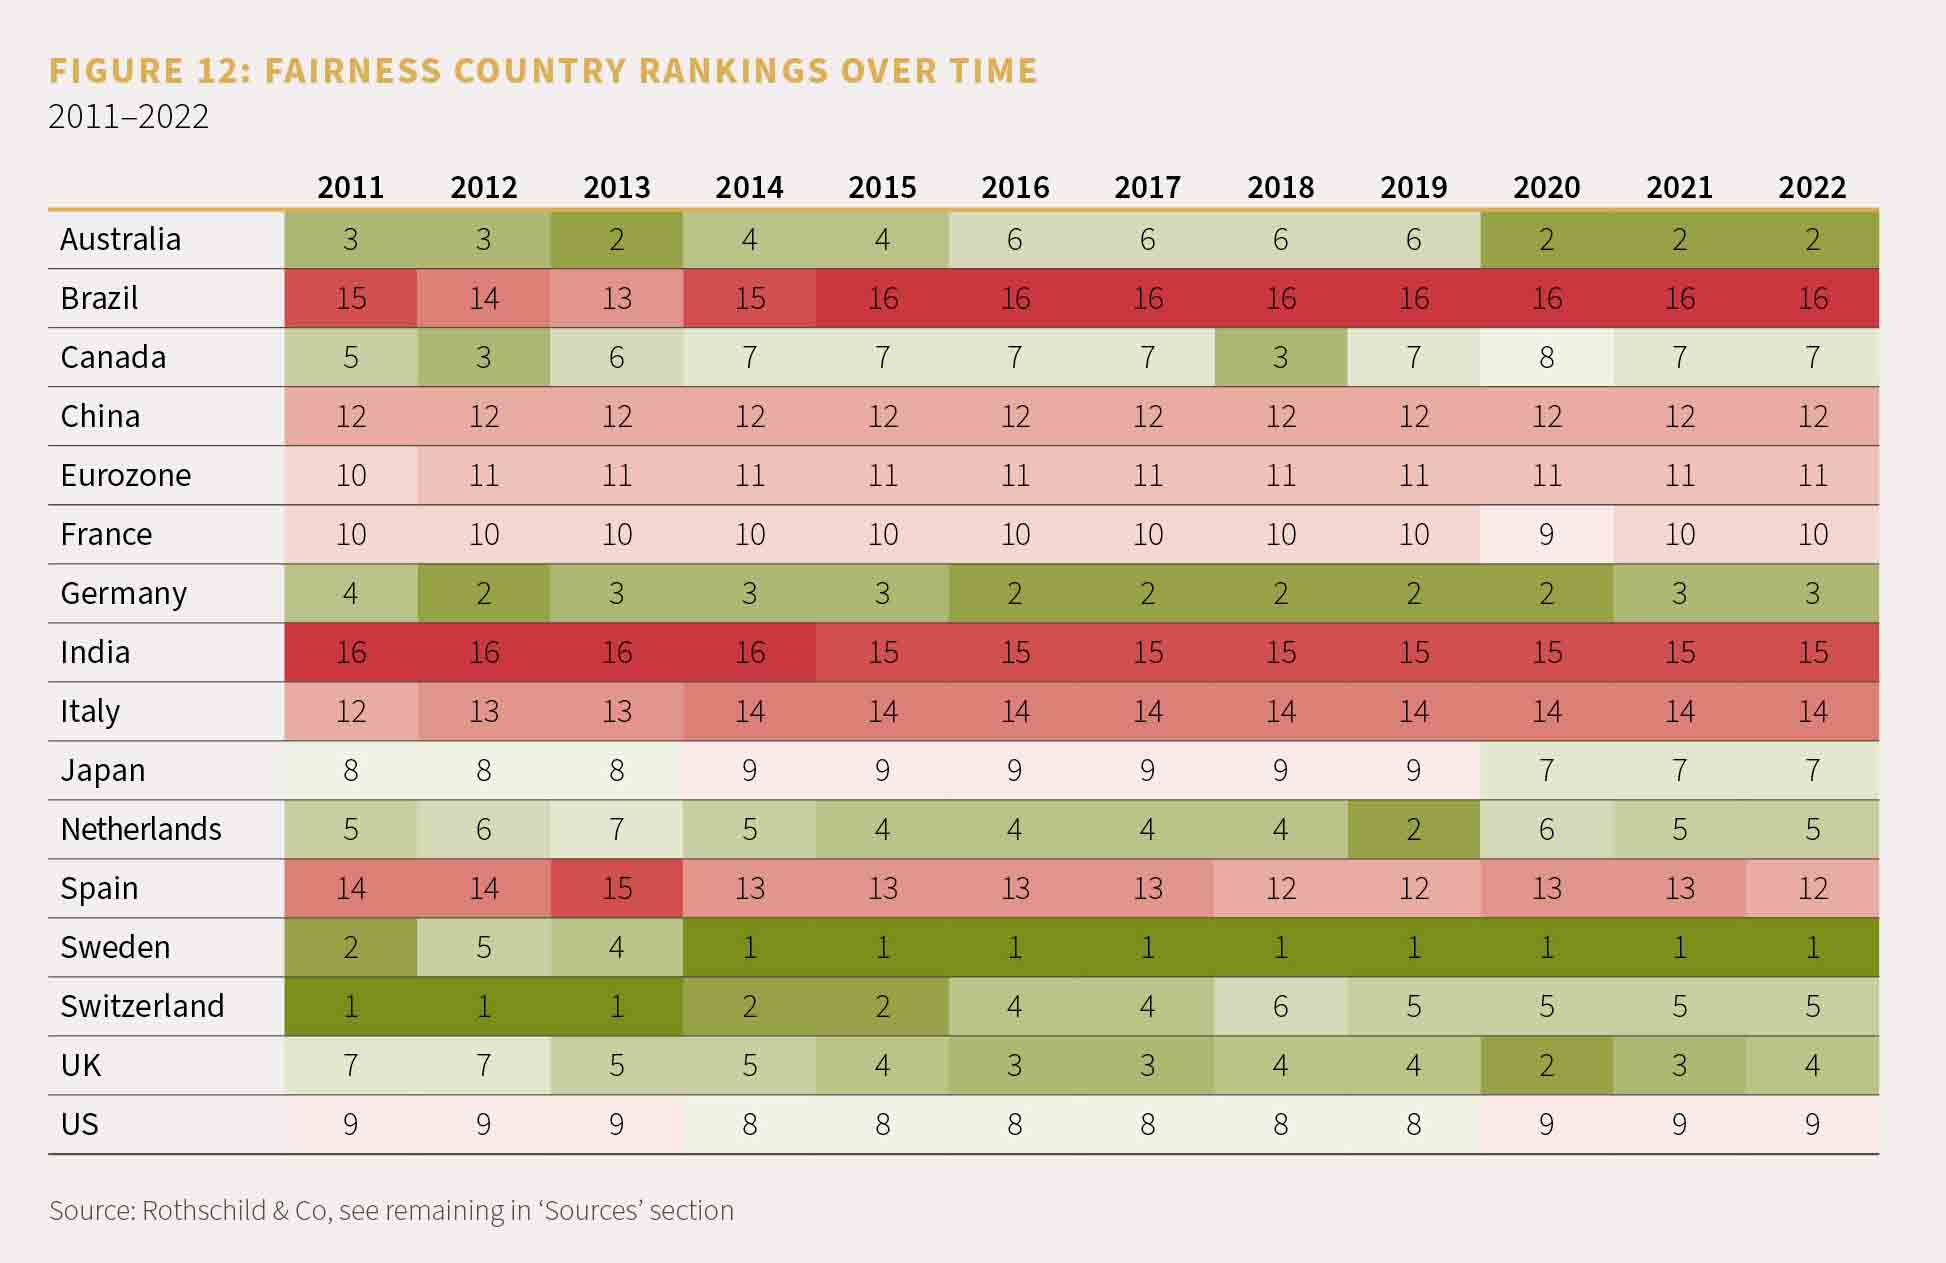 Chart showing fairness country rankings over time